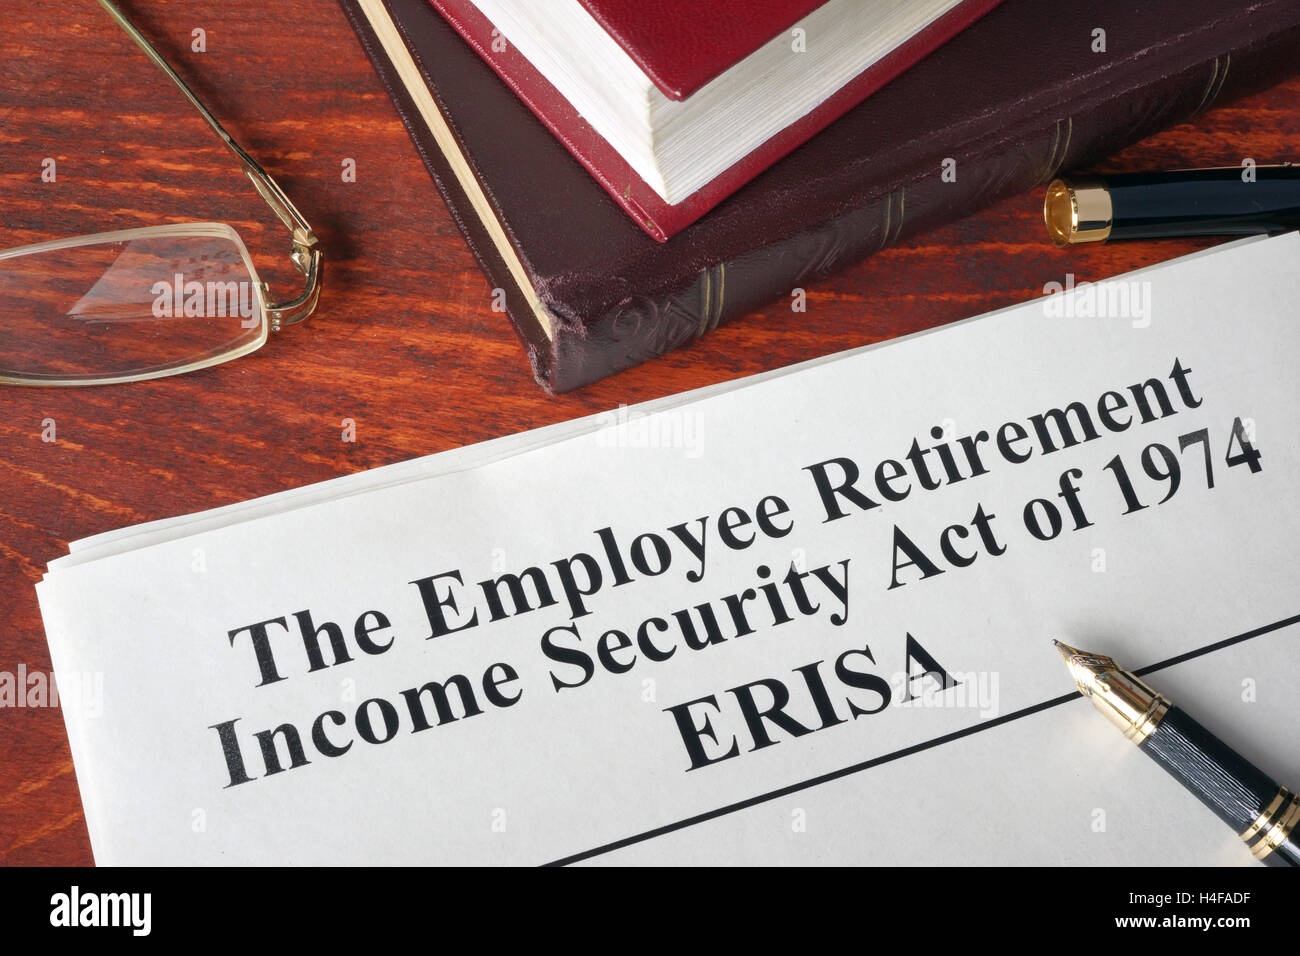 ERISA The Employee Retirement Income Security Act of 1974  on a table. Stock Photo